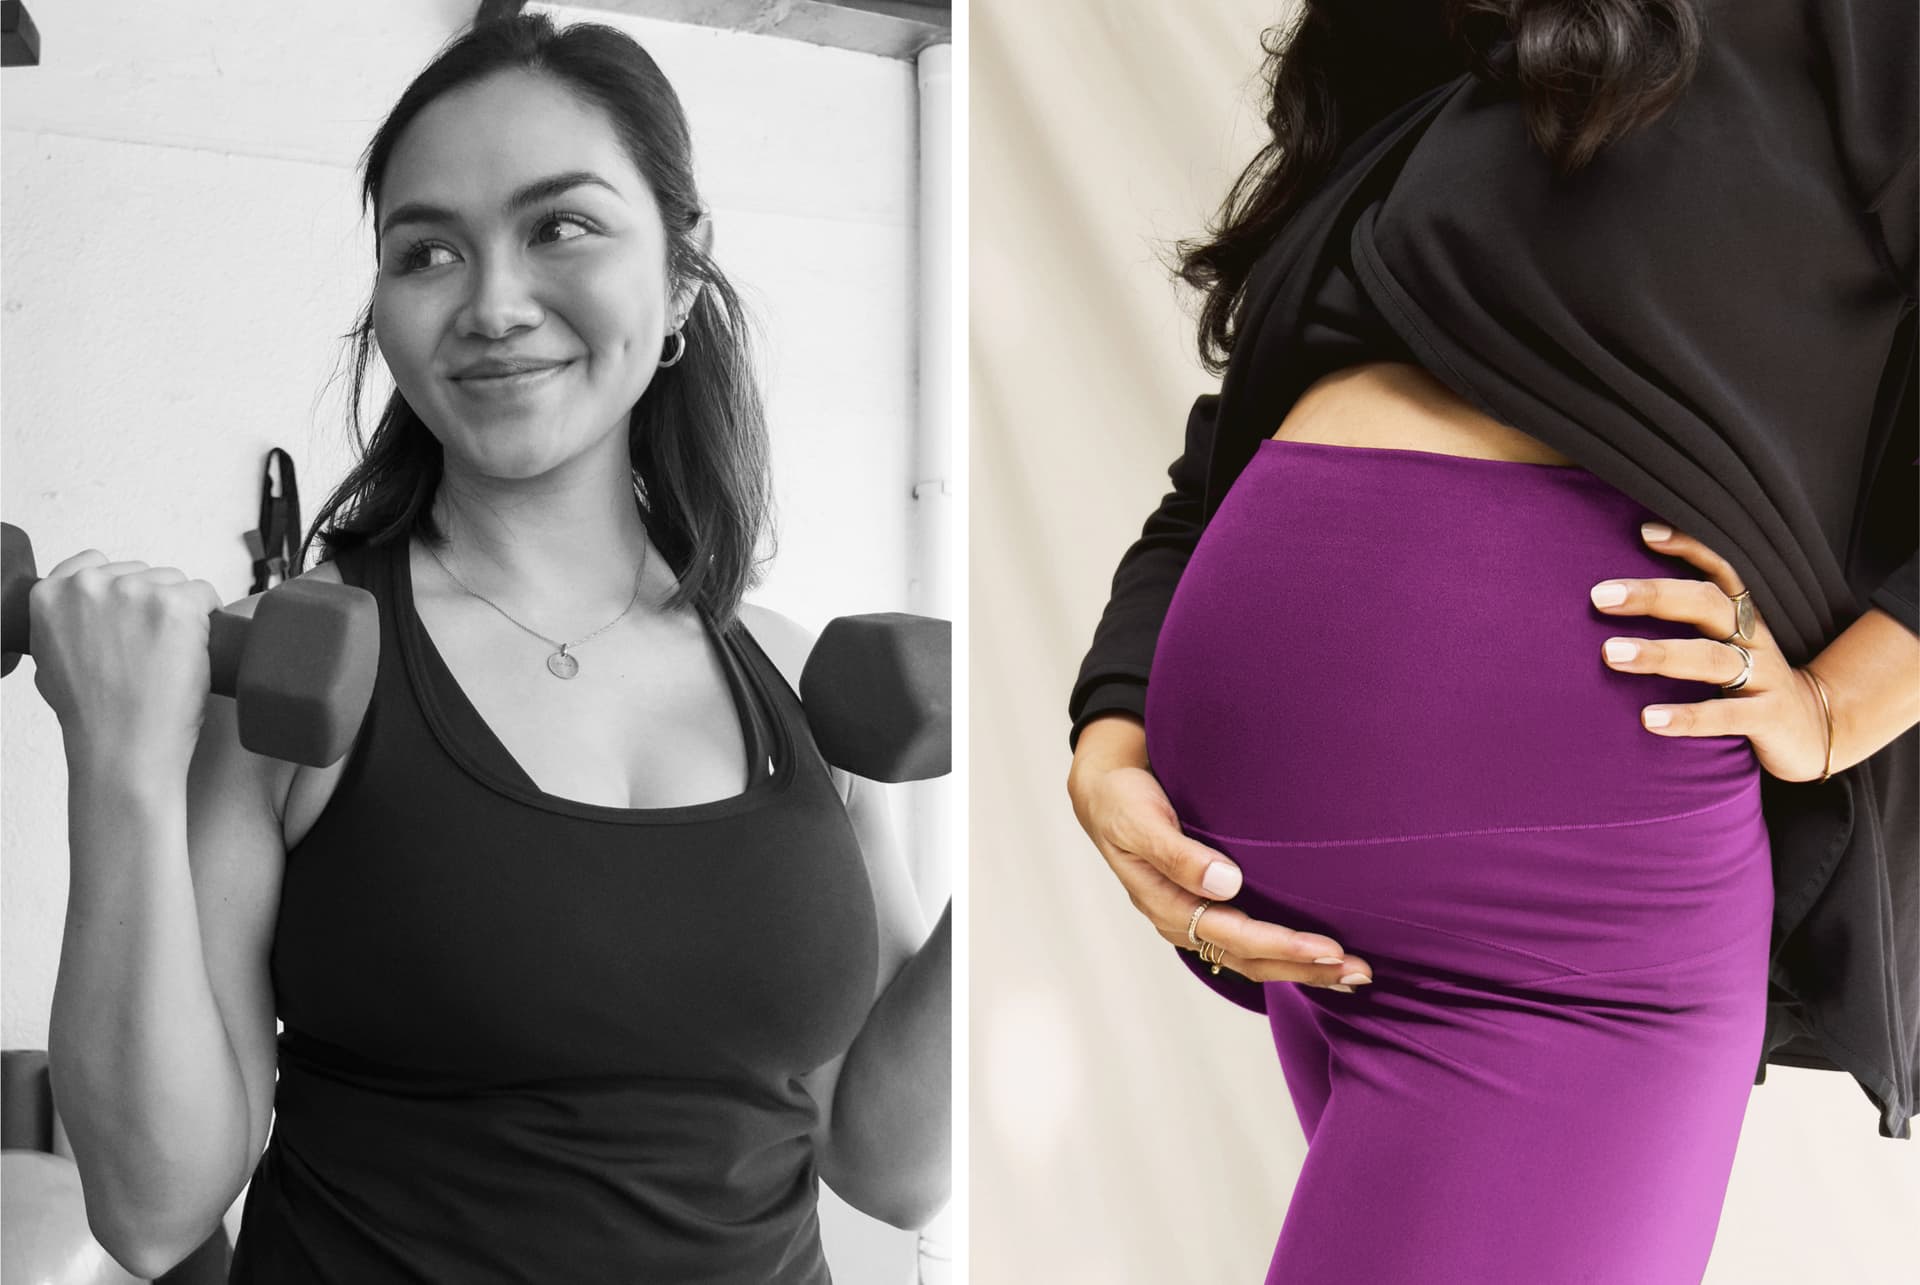 Nike Maternity Collection.